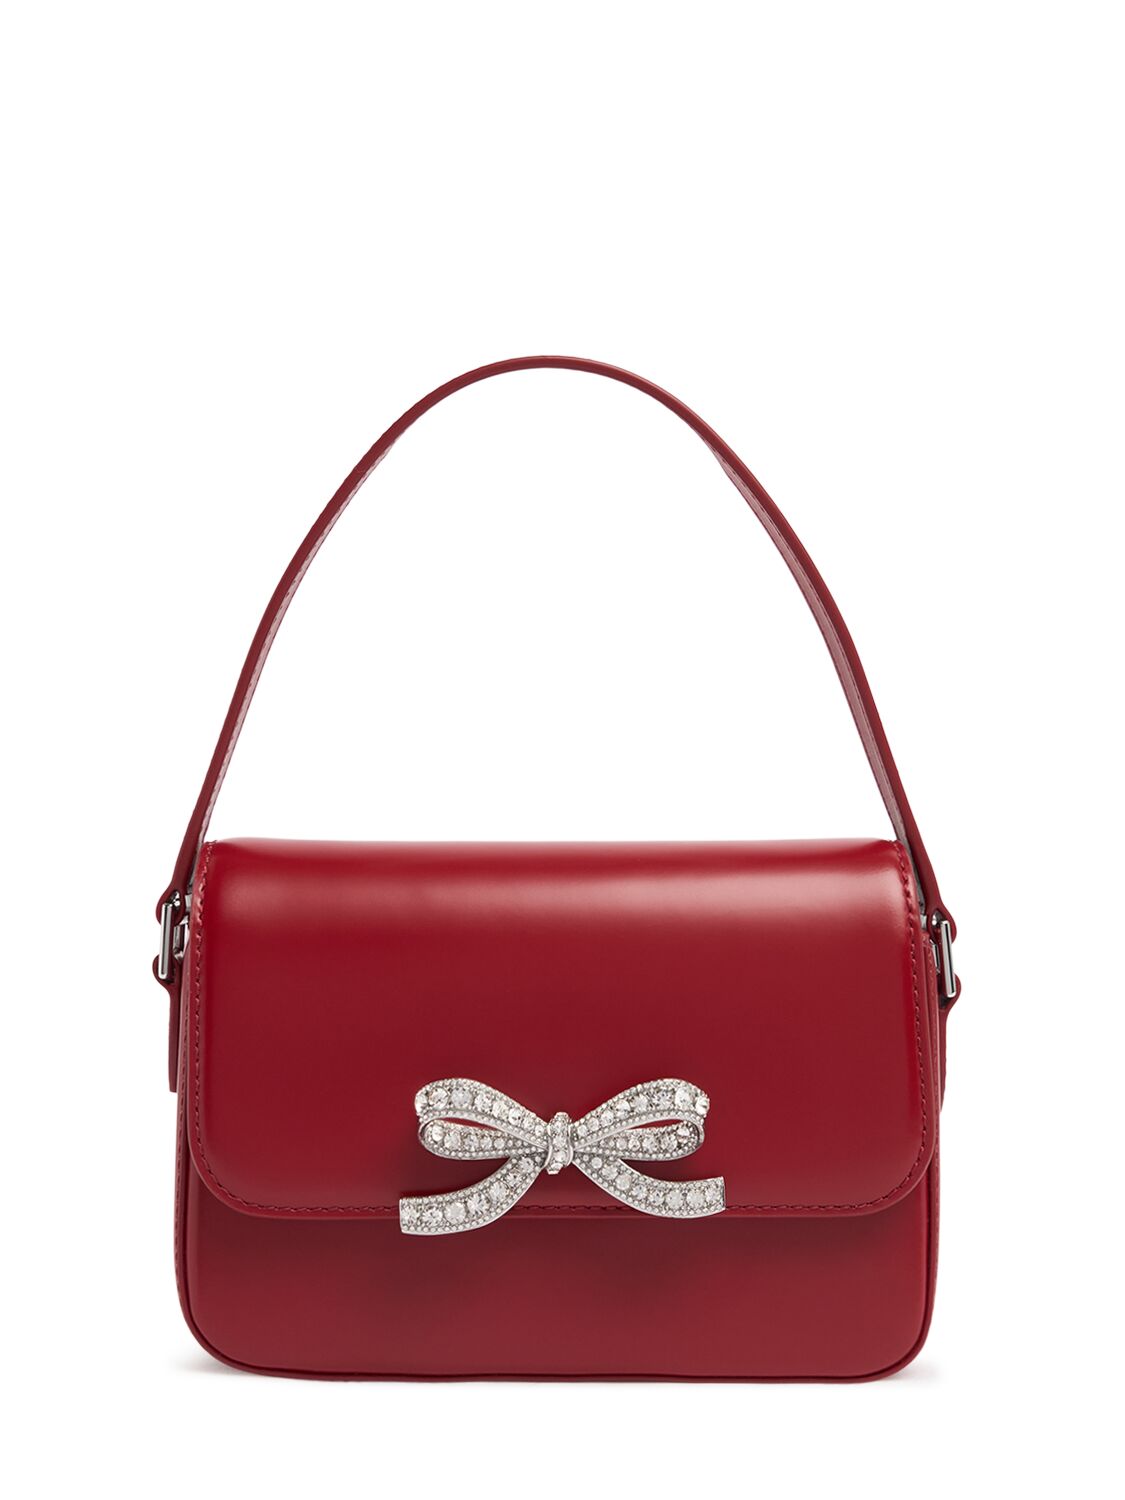 Self-portrait Micro Bow Leather Shoulder Bag In Burgundy